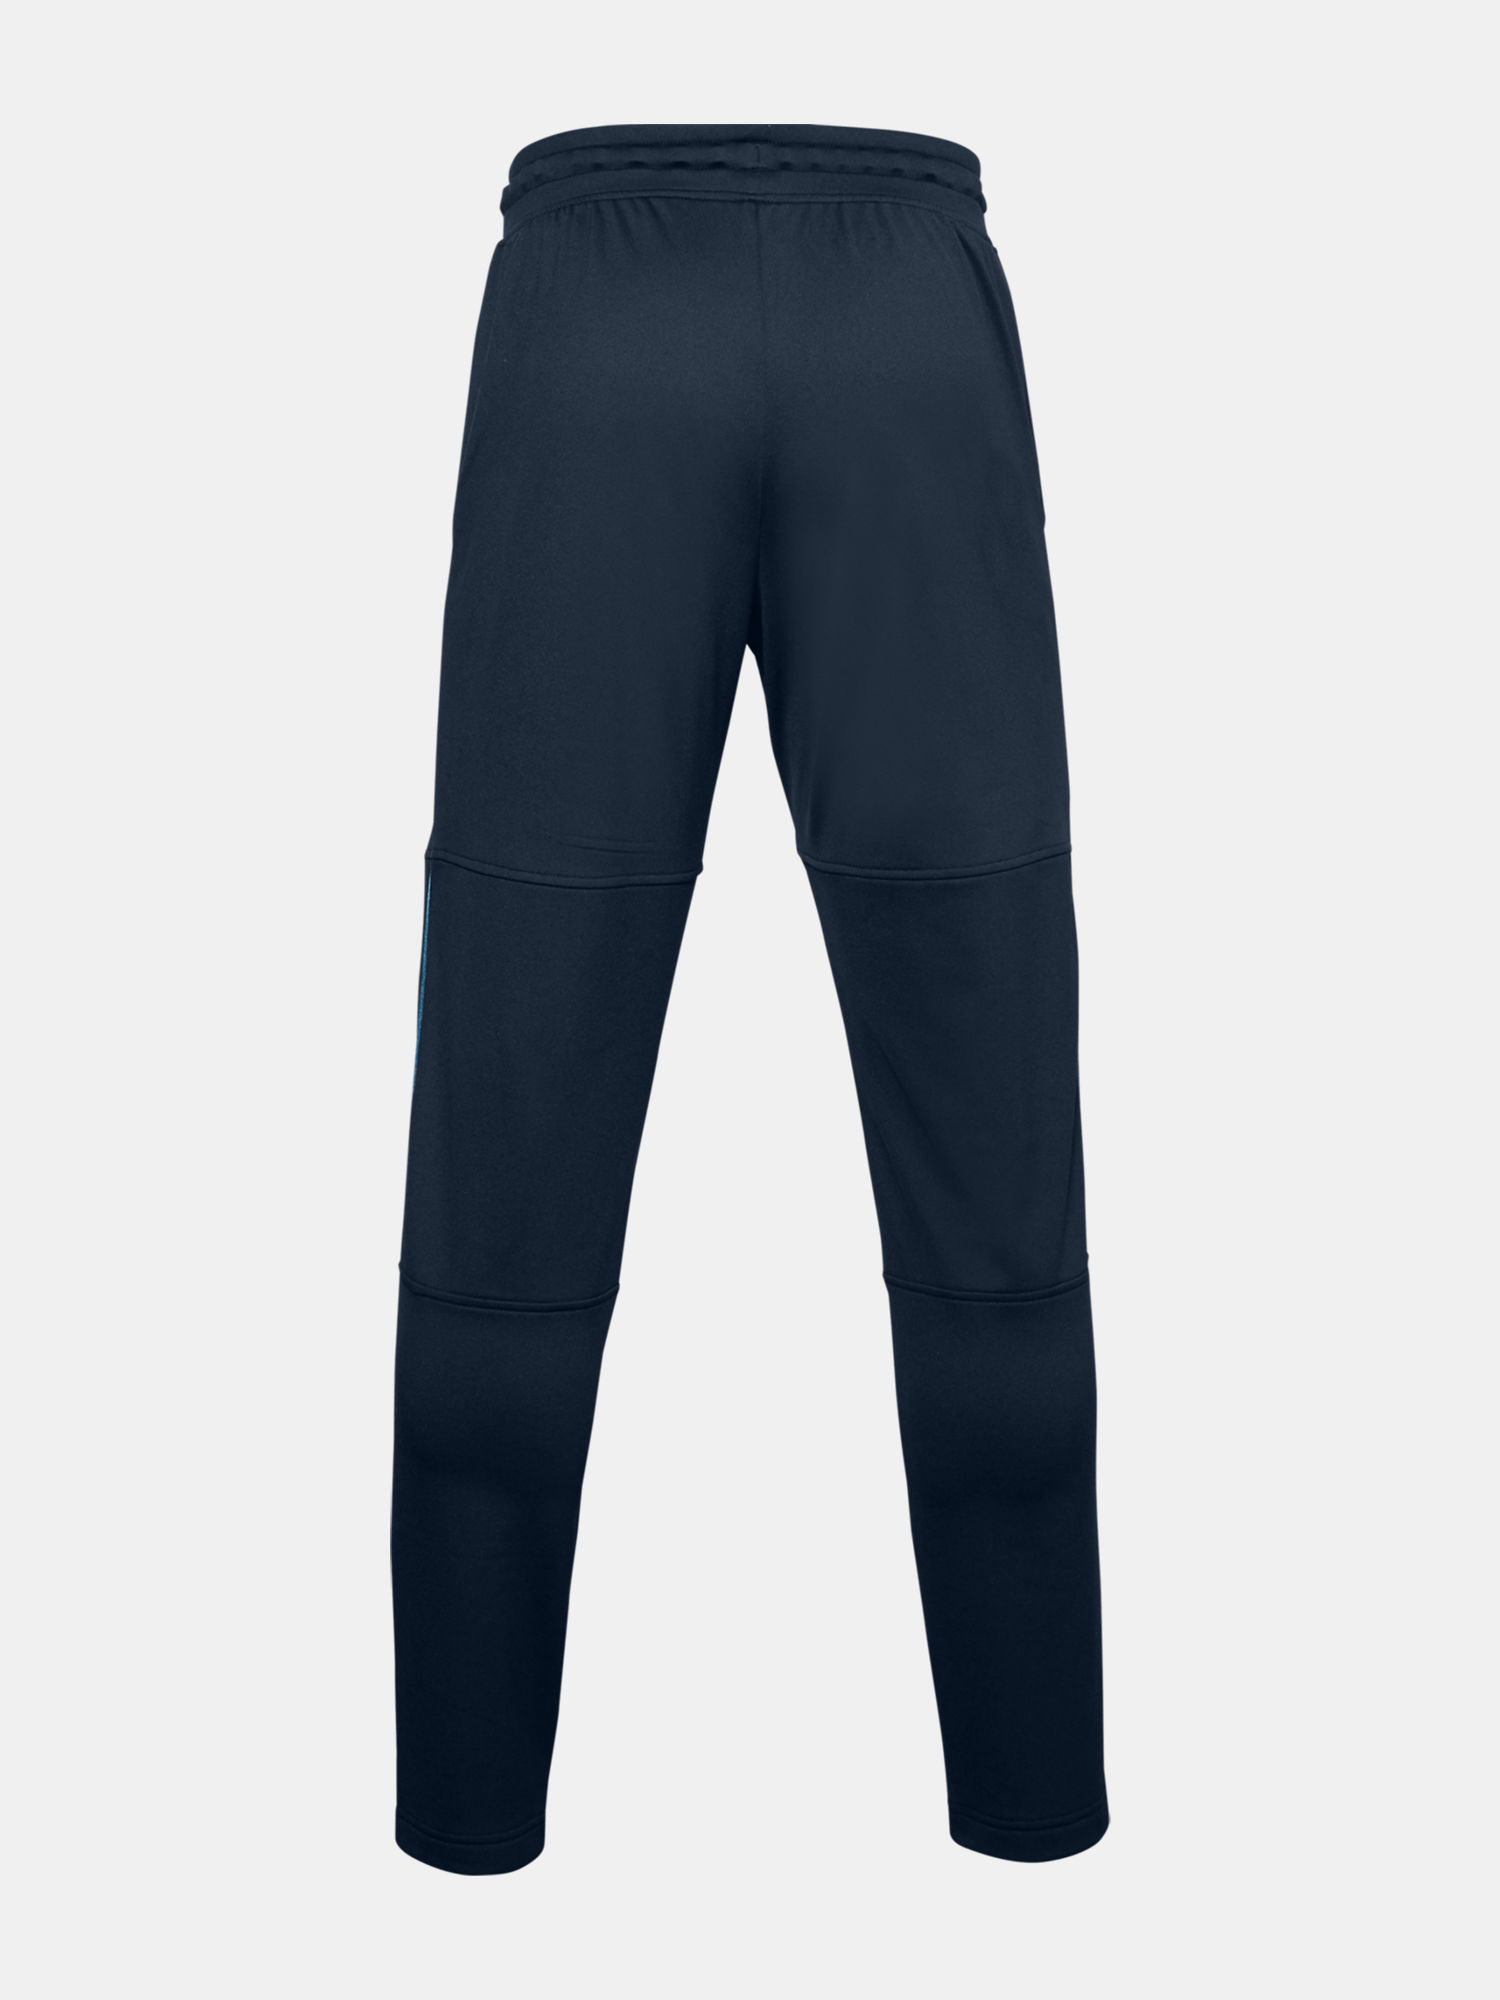 Nohavice Under Armour PJT ROCK KNIT TRACK PANT-NVY (4)